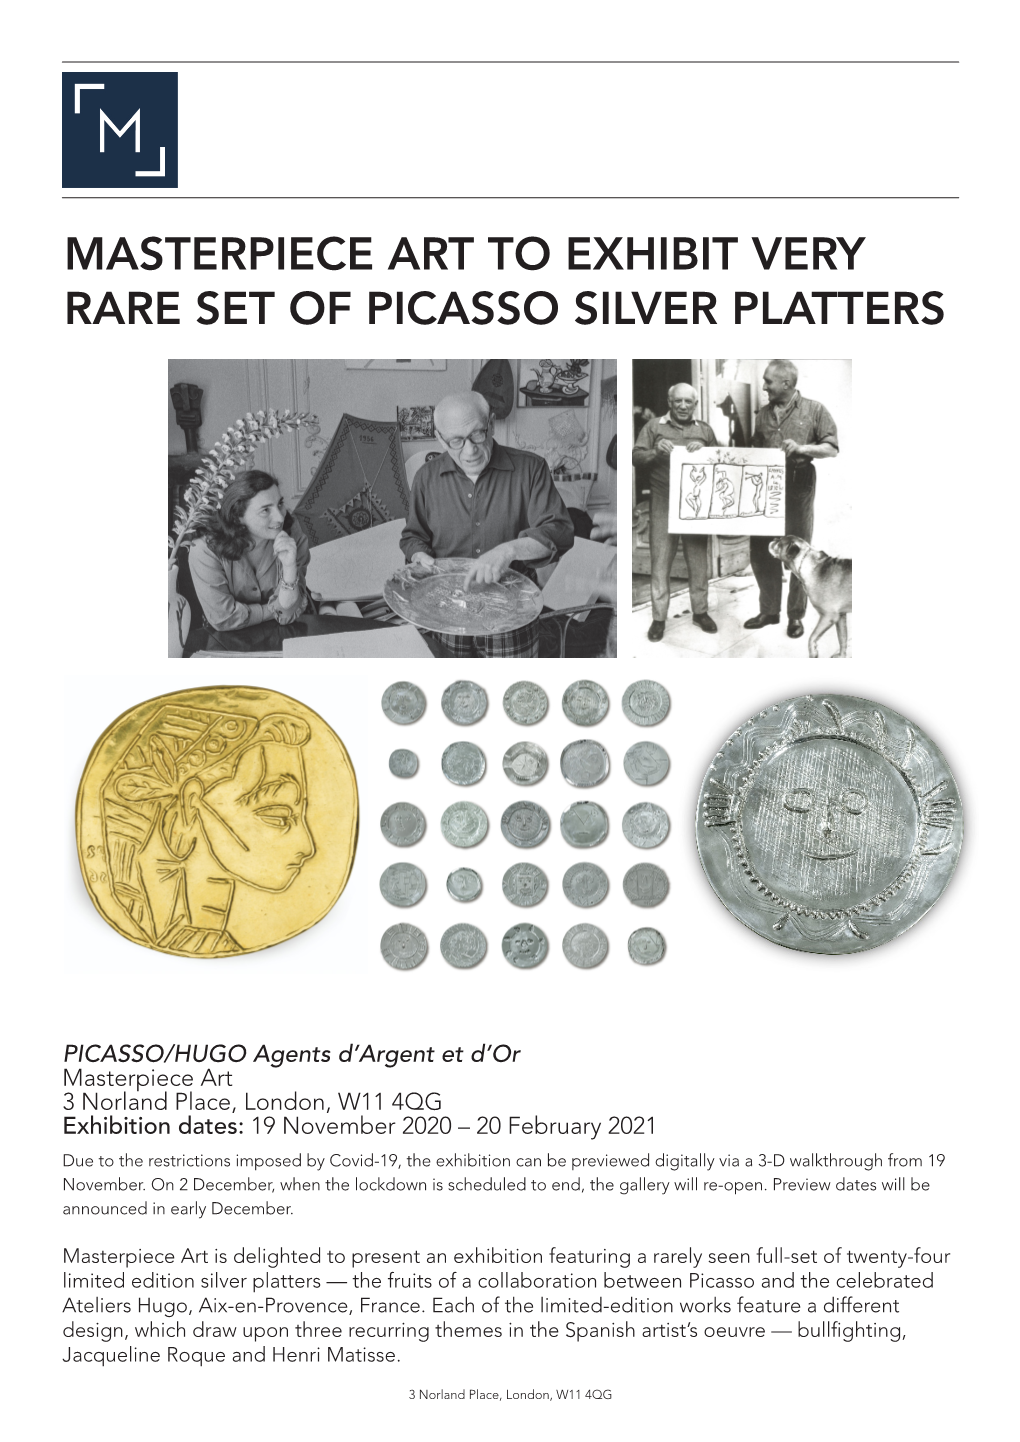 Masterpiece Art to Exhibit Very Rare Set of Picasso Silver Platters